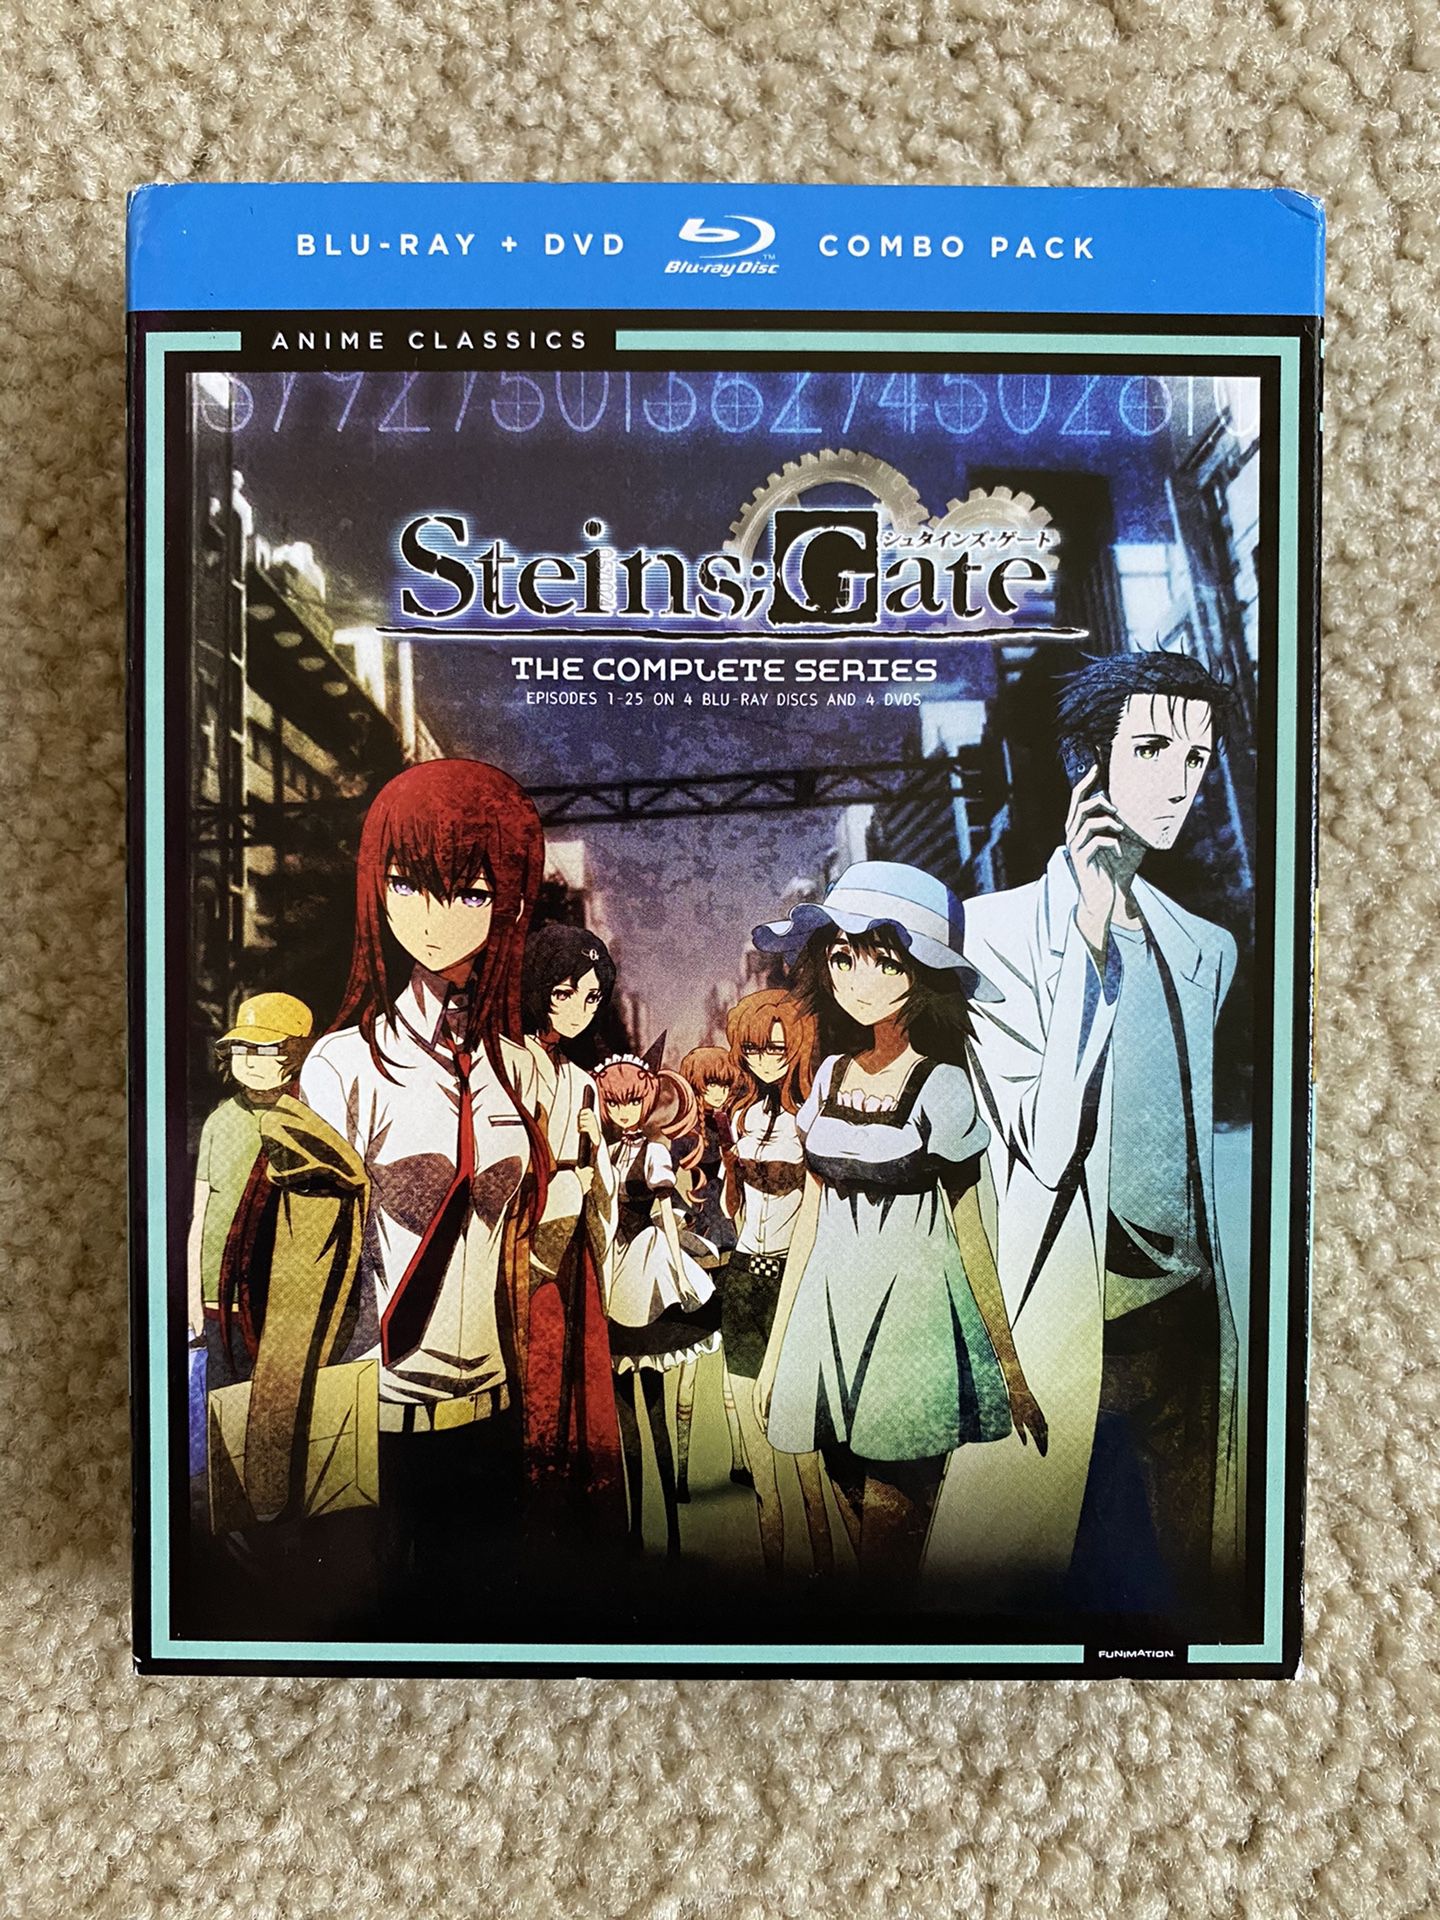 Steins Gate - The complete series Blu-Ray + DVD combo pack